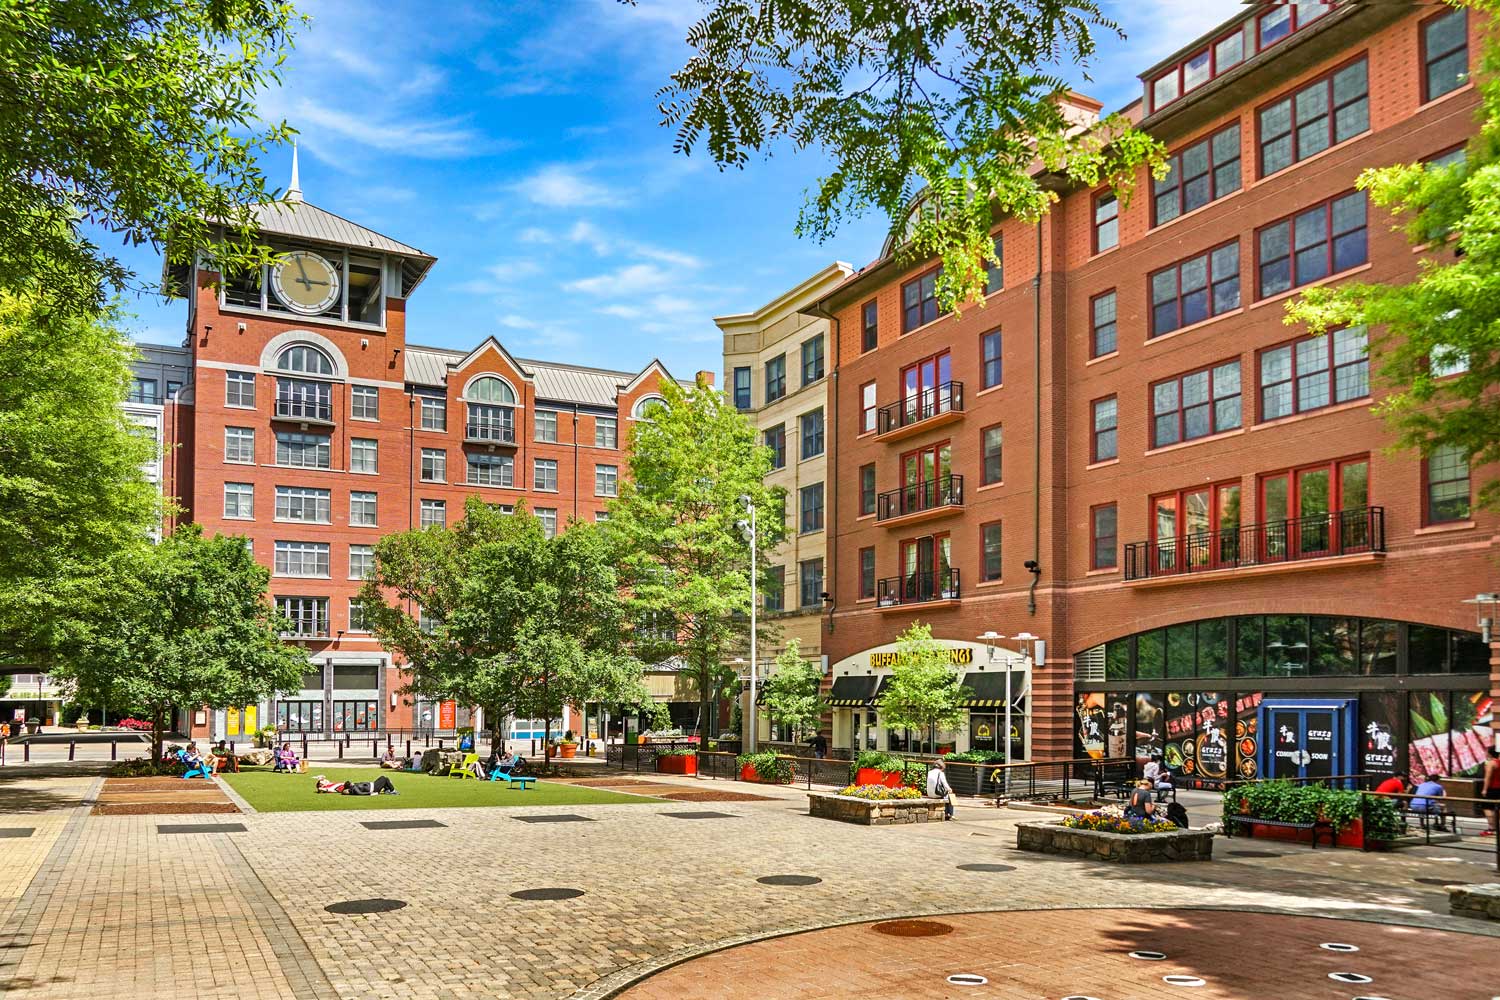 Rockville Town Square is 10 minutes from Village Square West Apartments